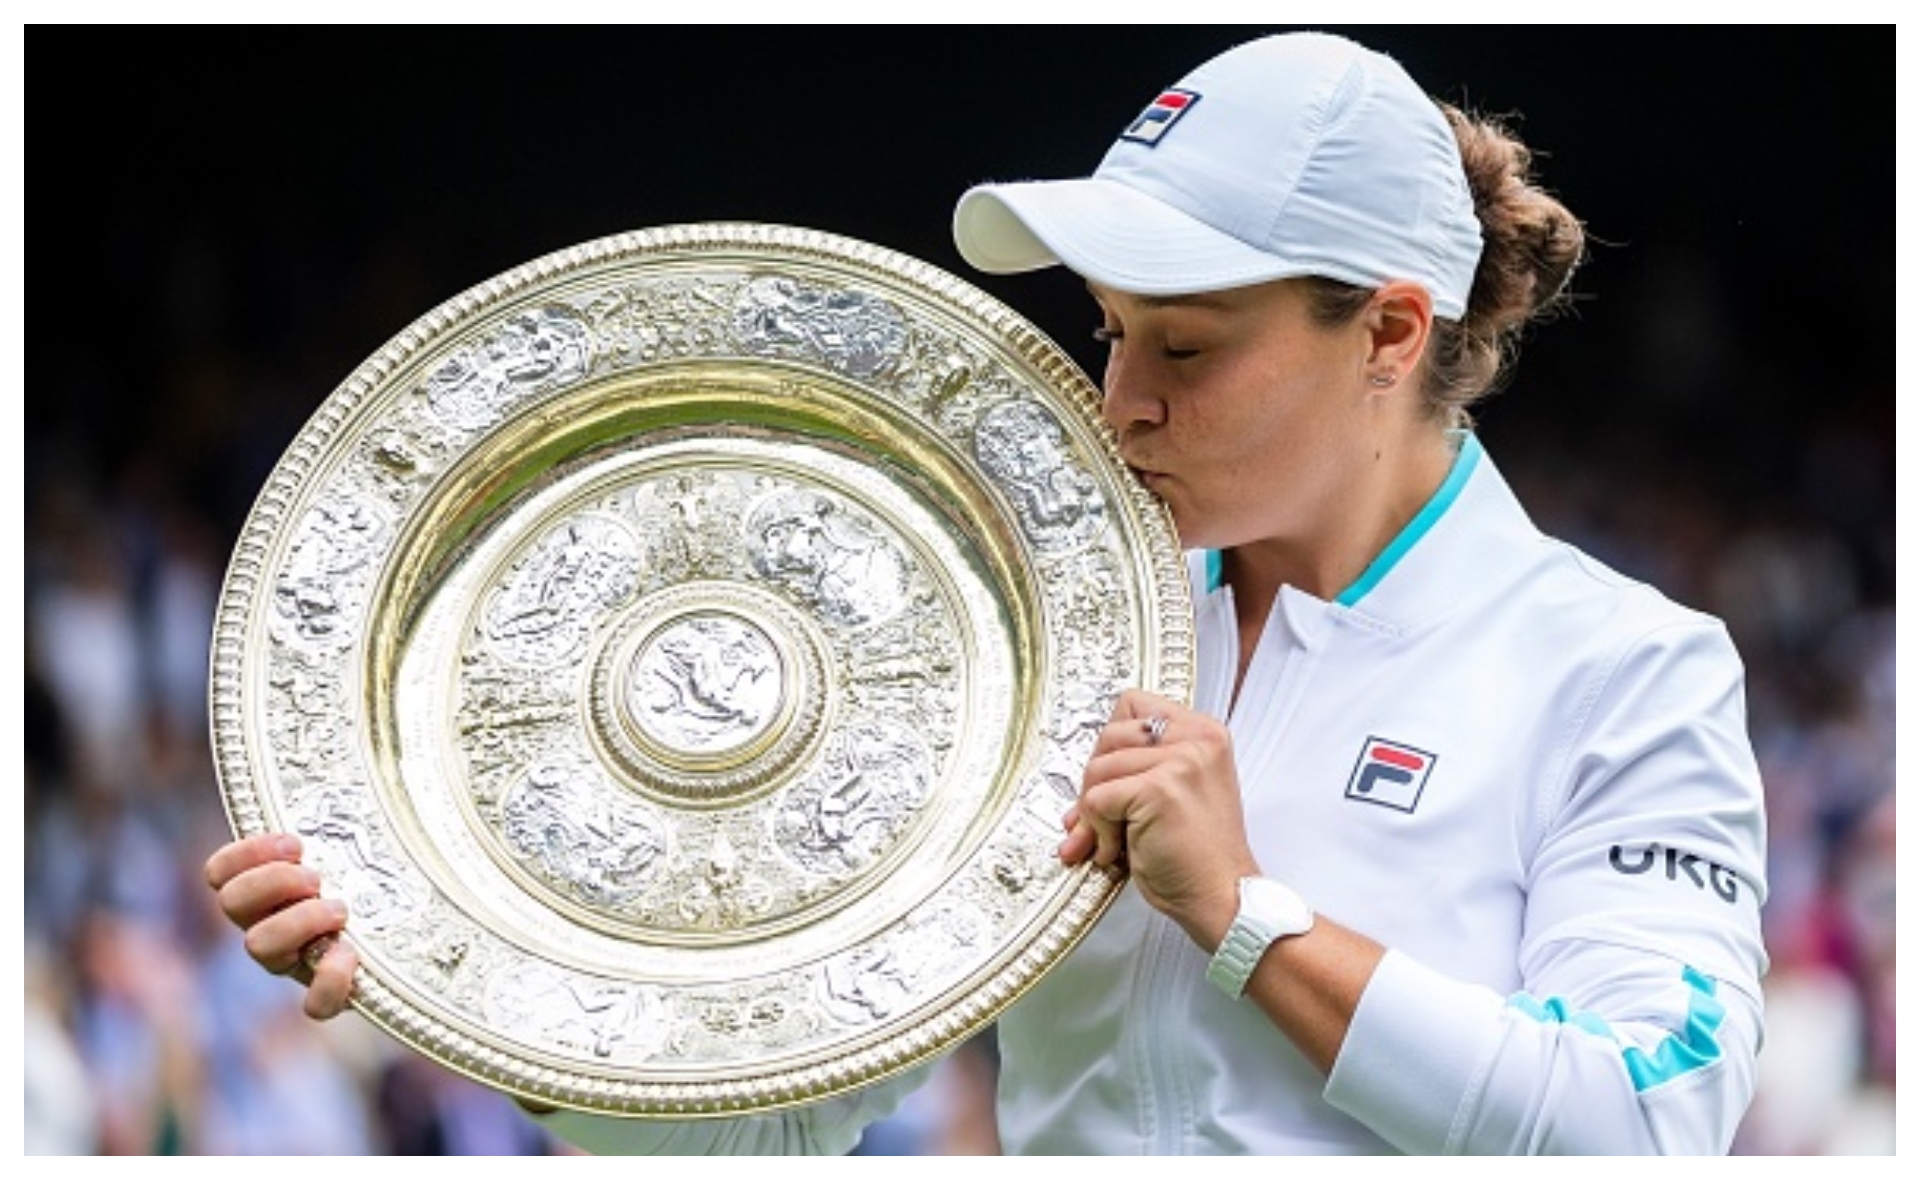 She’s scooped her first Wimbledon title, but for Ash Barty family and humility are still what matters most